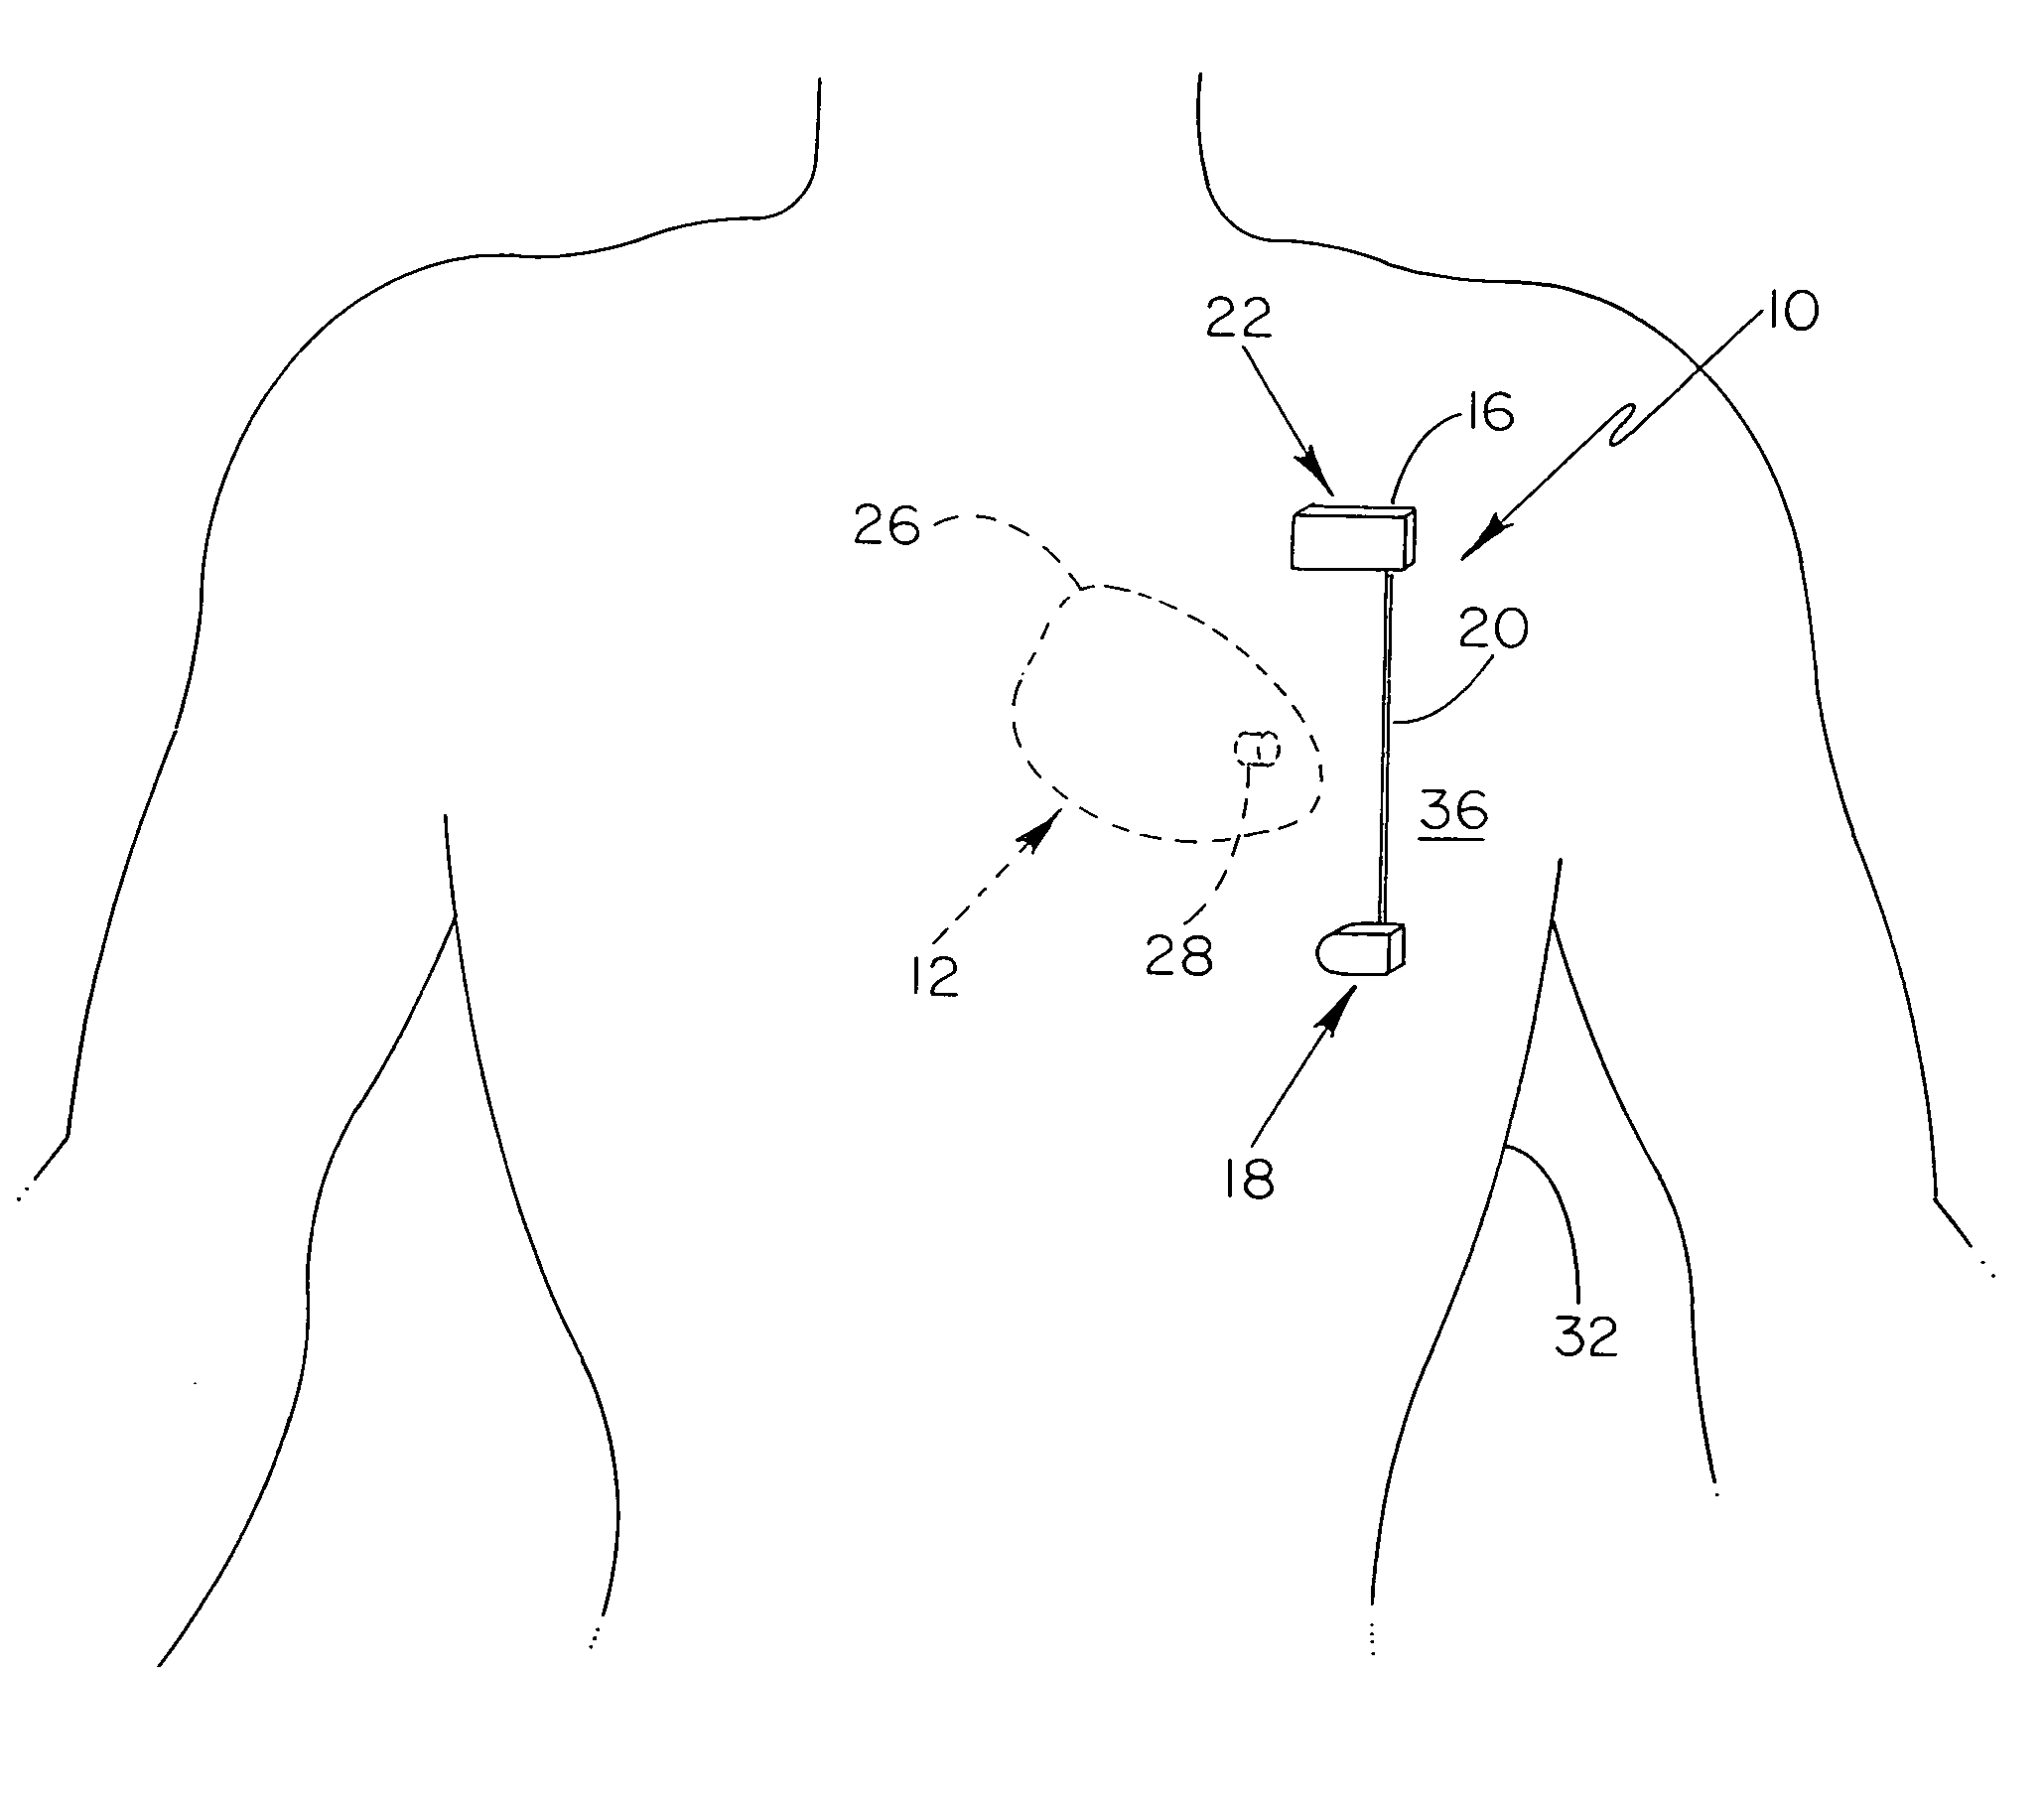 Anti-coagulation and demineralization system for conductive medical devices